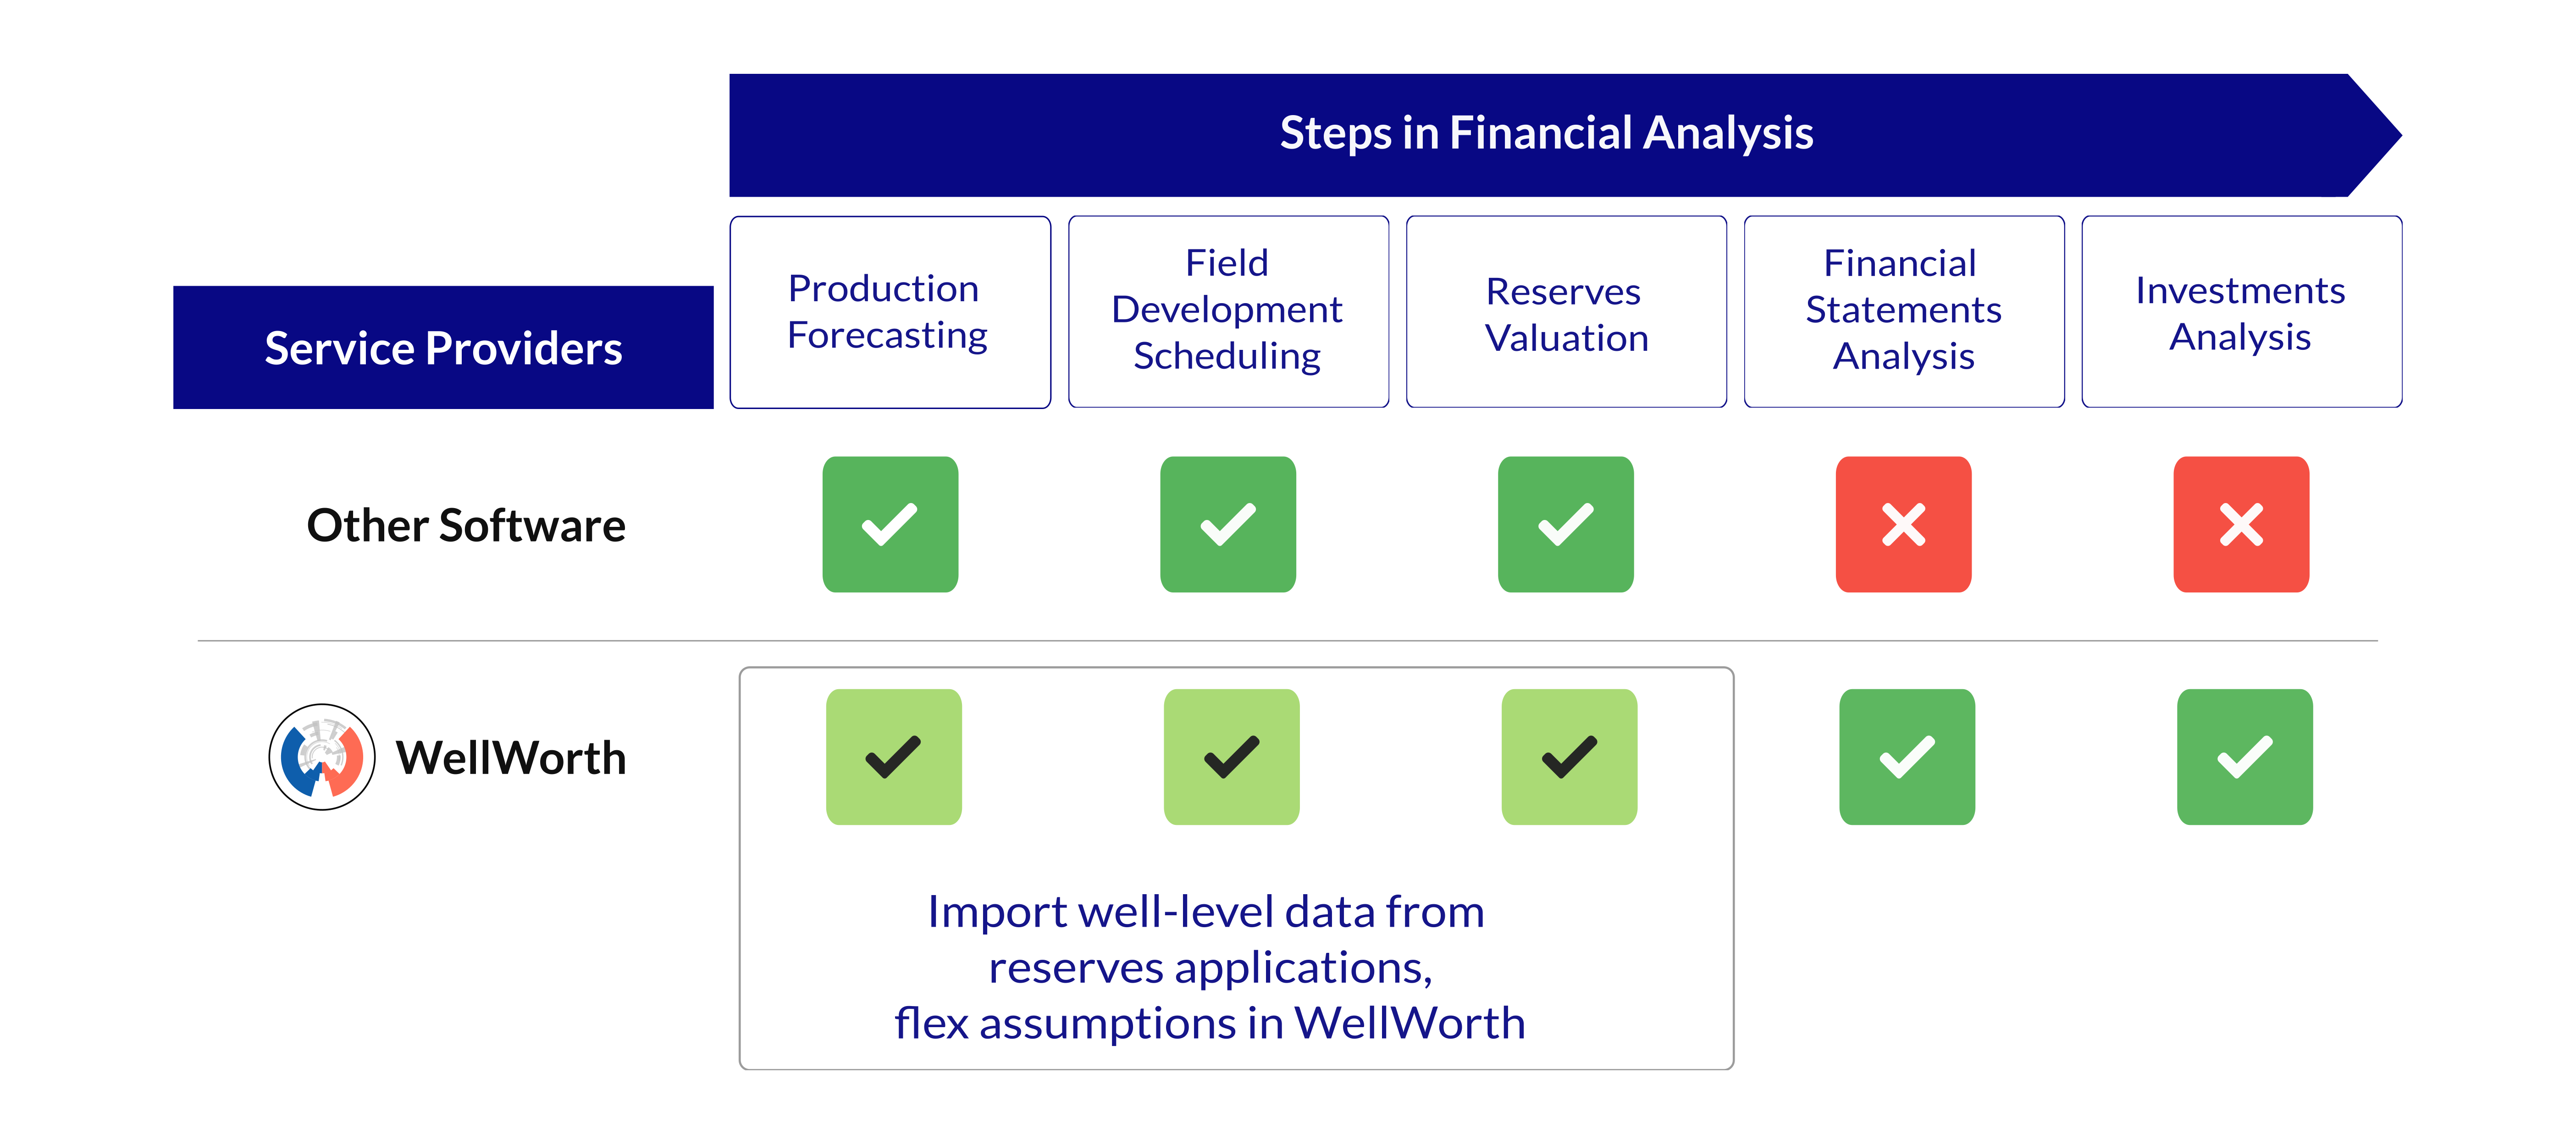 Other oil and gas financial modeling applications are limited to Raw Data, Production Forecasting, and Reserves Valuation.